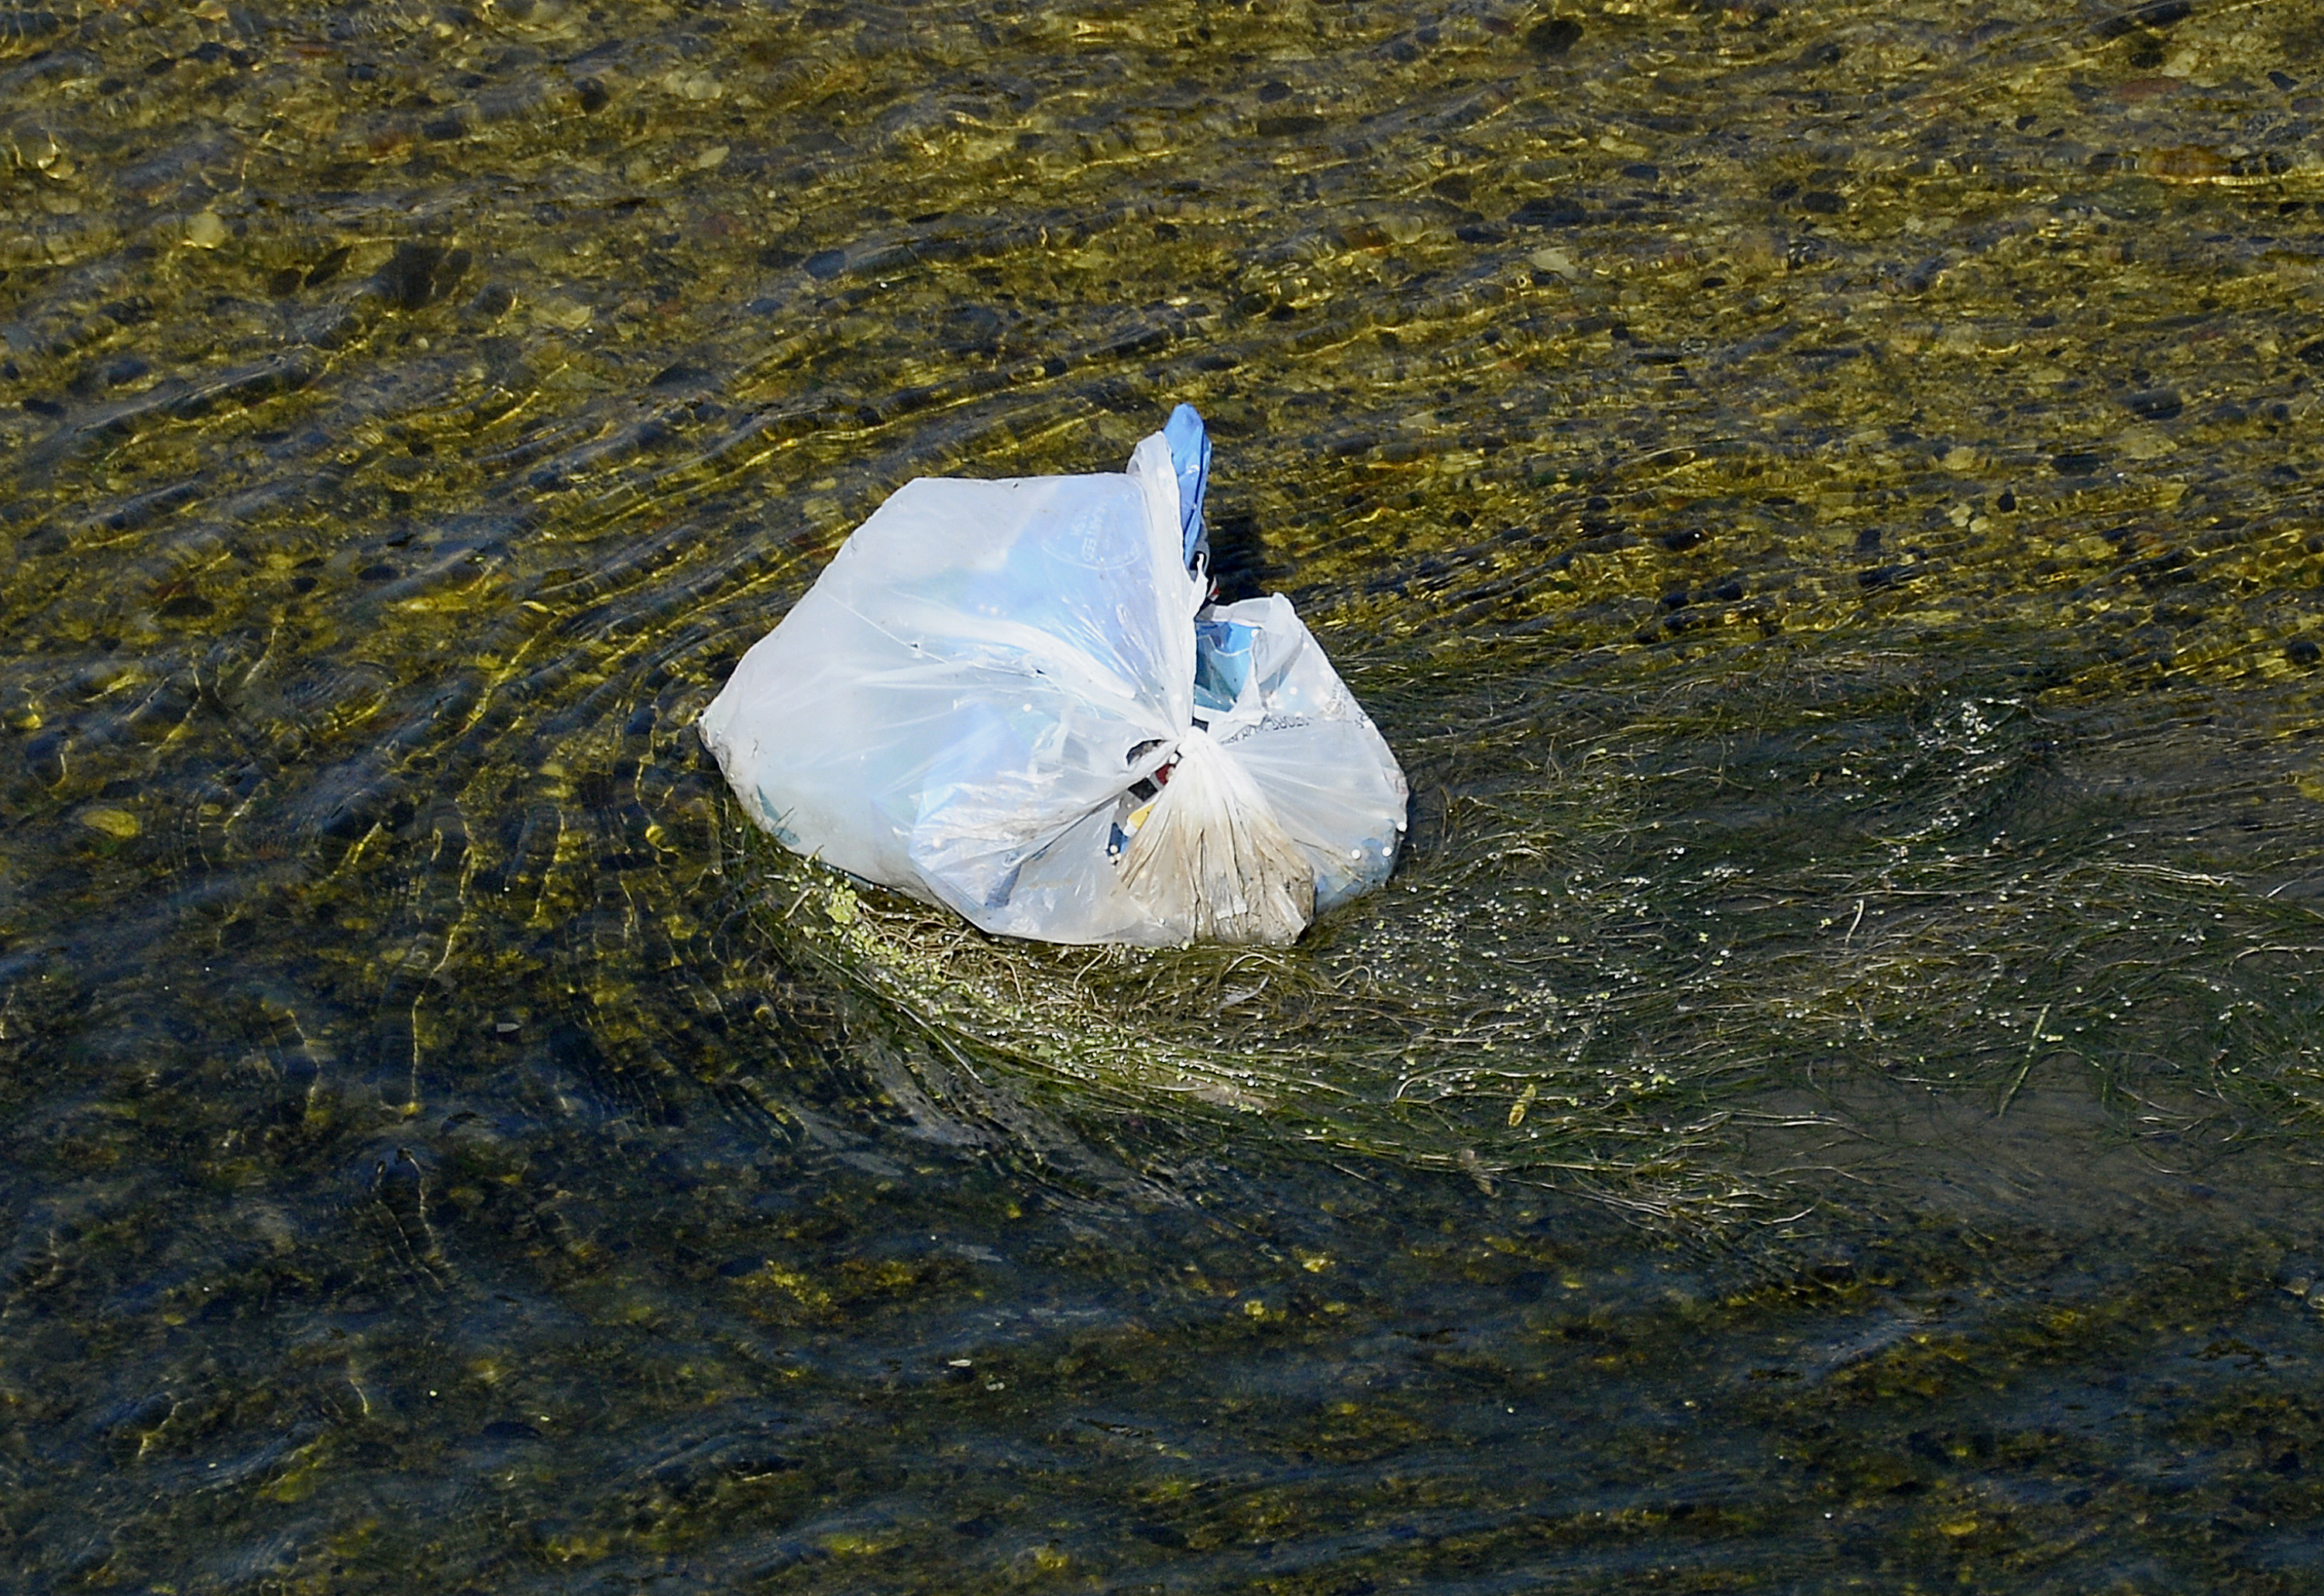 California First State To Ban Plastic Bags